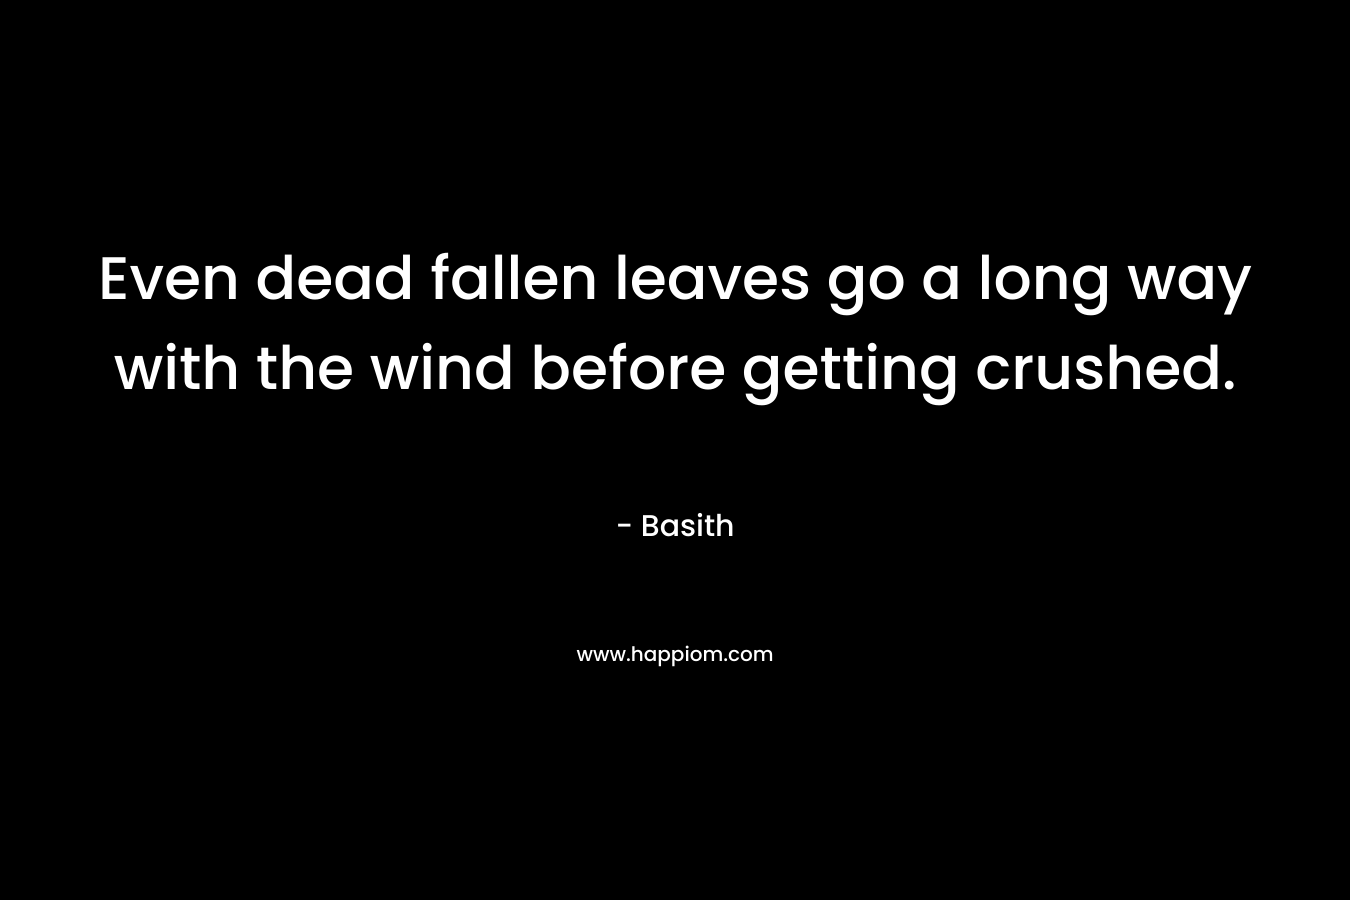 Even dead fallen leaves go a long way with the wind before getting crushed. – Basith